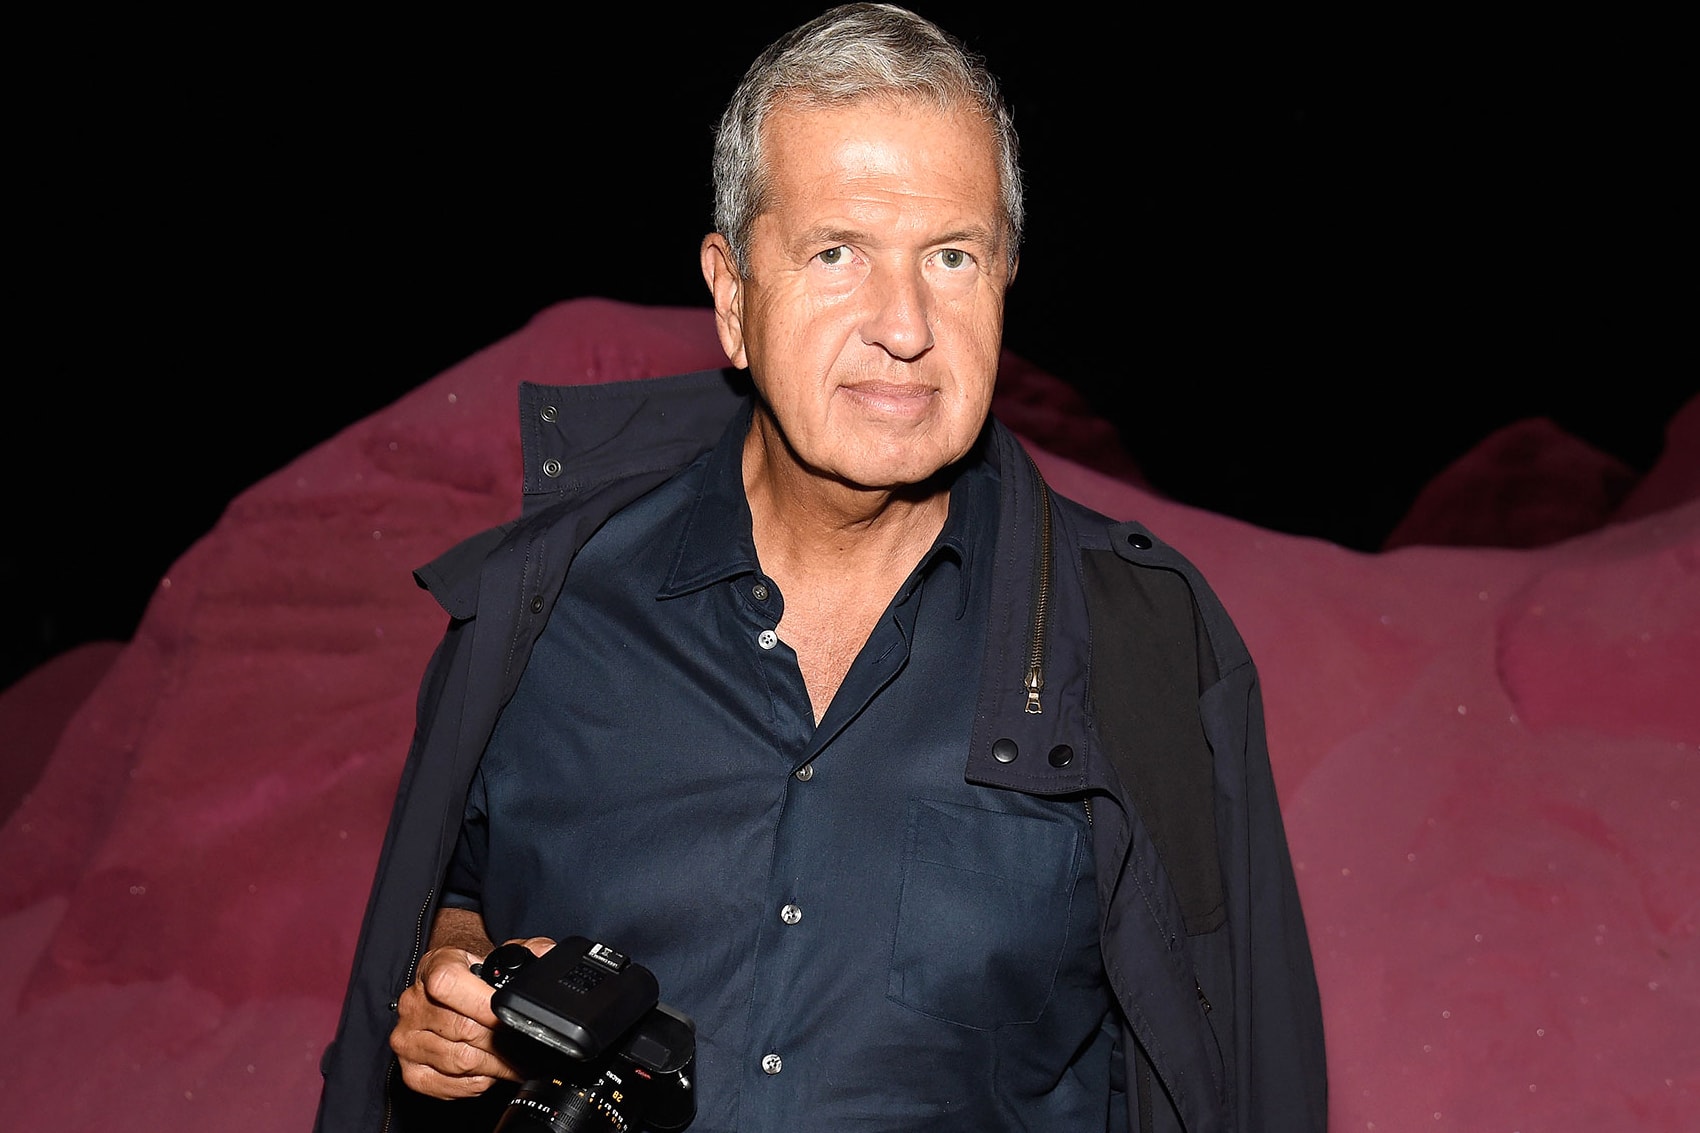 Burberry Stuart Weitzman Michael Kors Drop Mario Testino Sexual Assault Misconduct Allegations Time's Up Fashion Industry